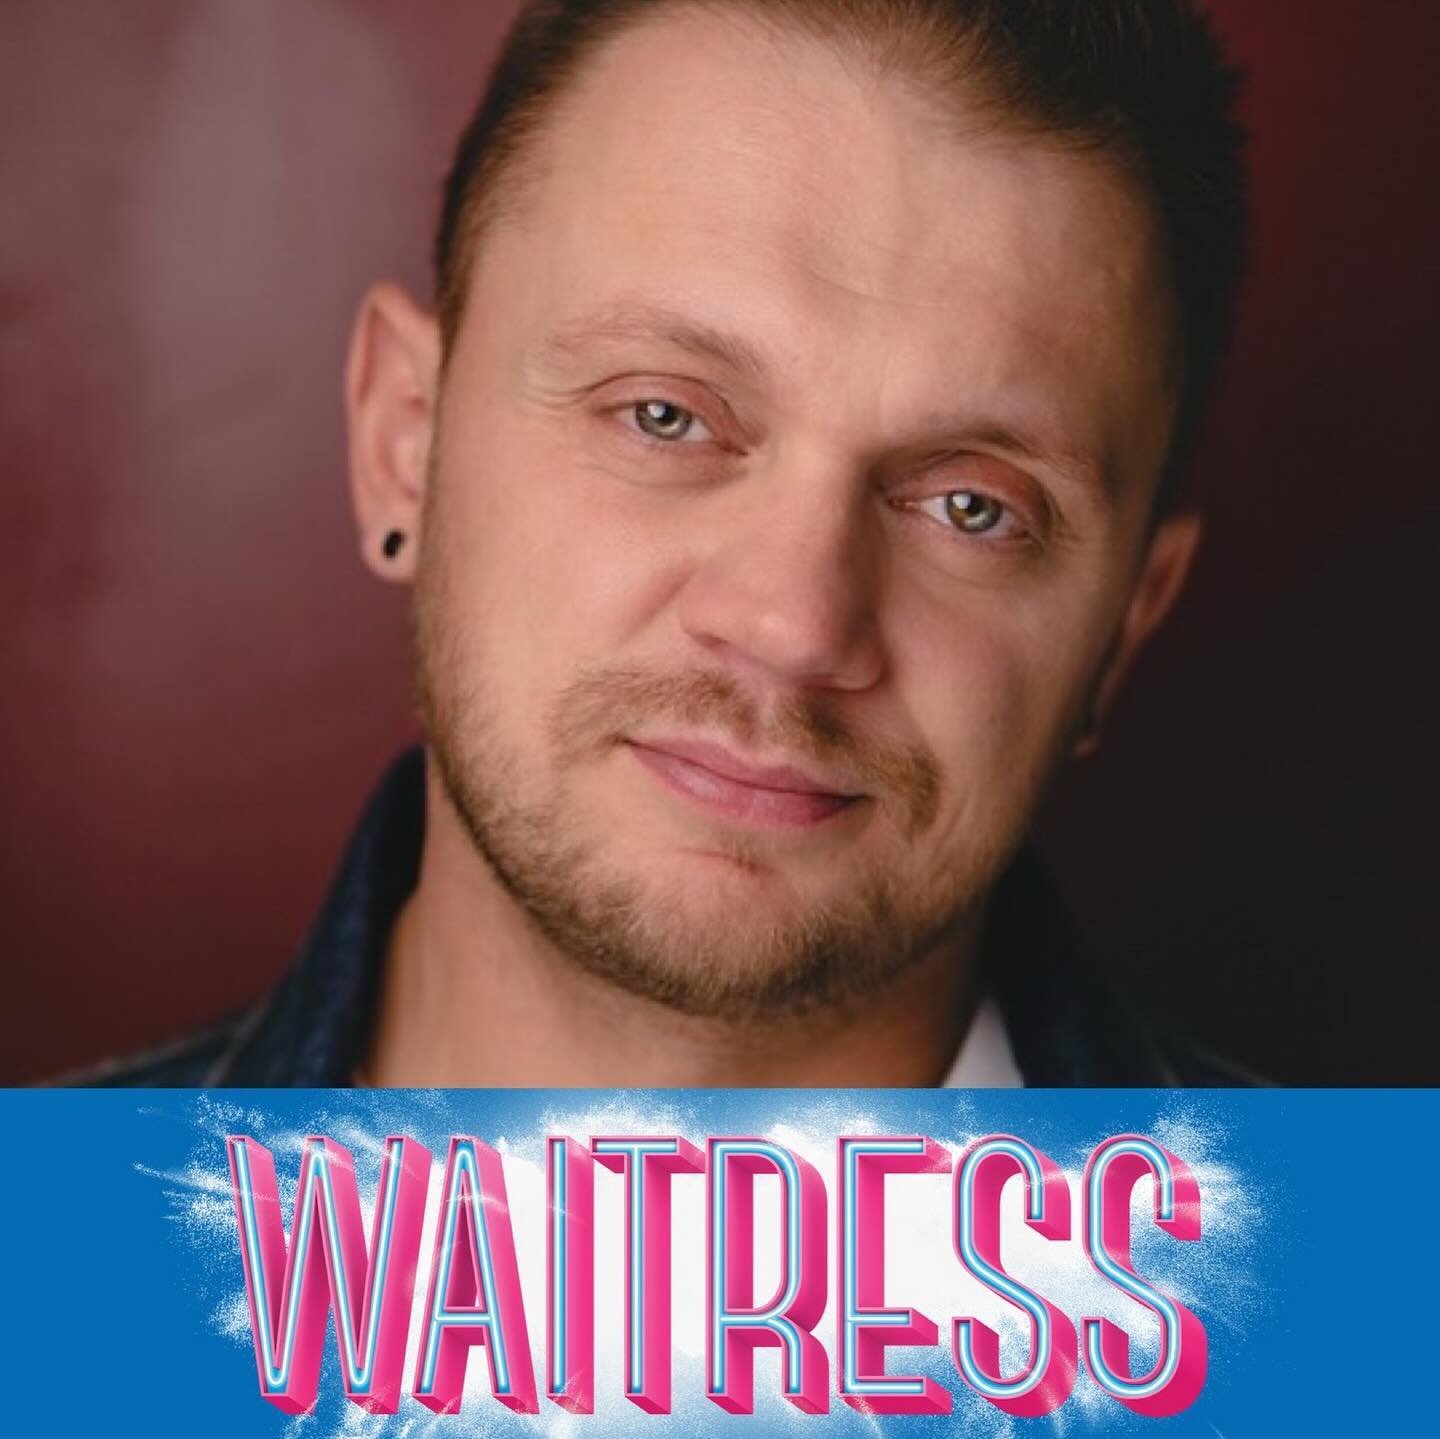 Wishing a happy opening to @mattdeangelis22 as he reprises his performance as Earl in WAITRESS at @ogunquitplayhouse after playing the role on Broadway and tour!

#wamfam